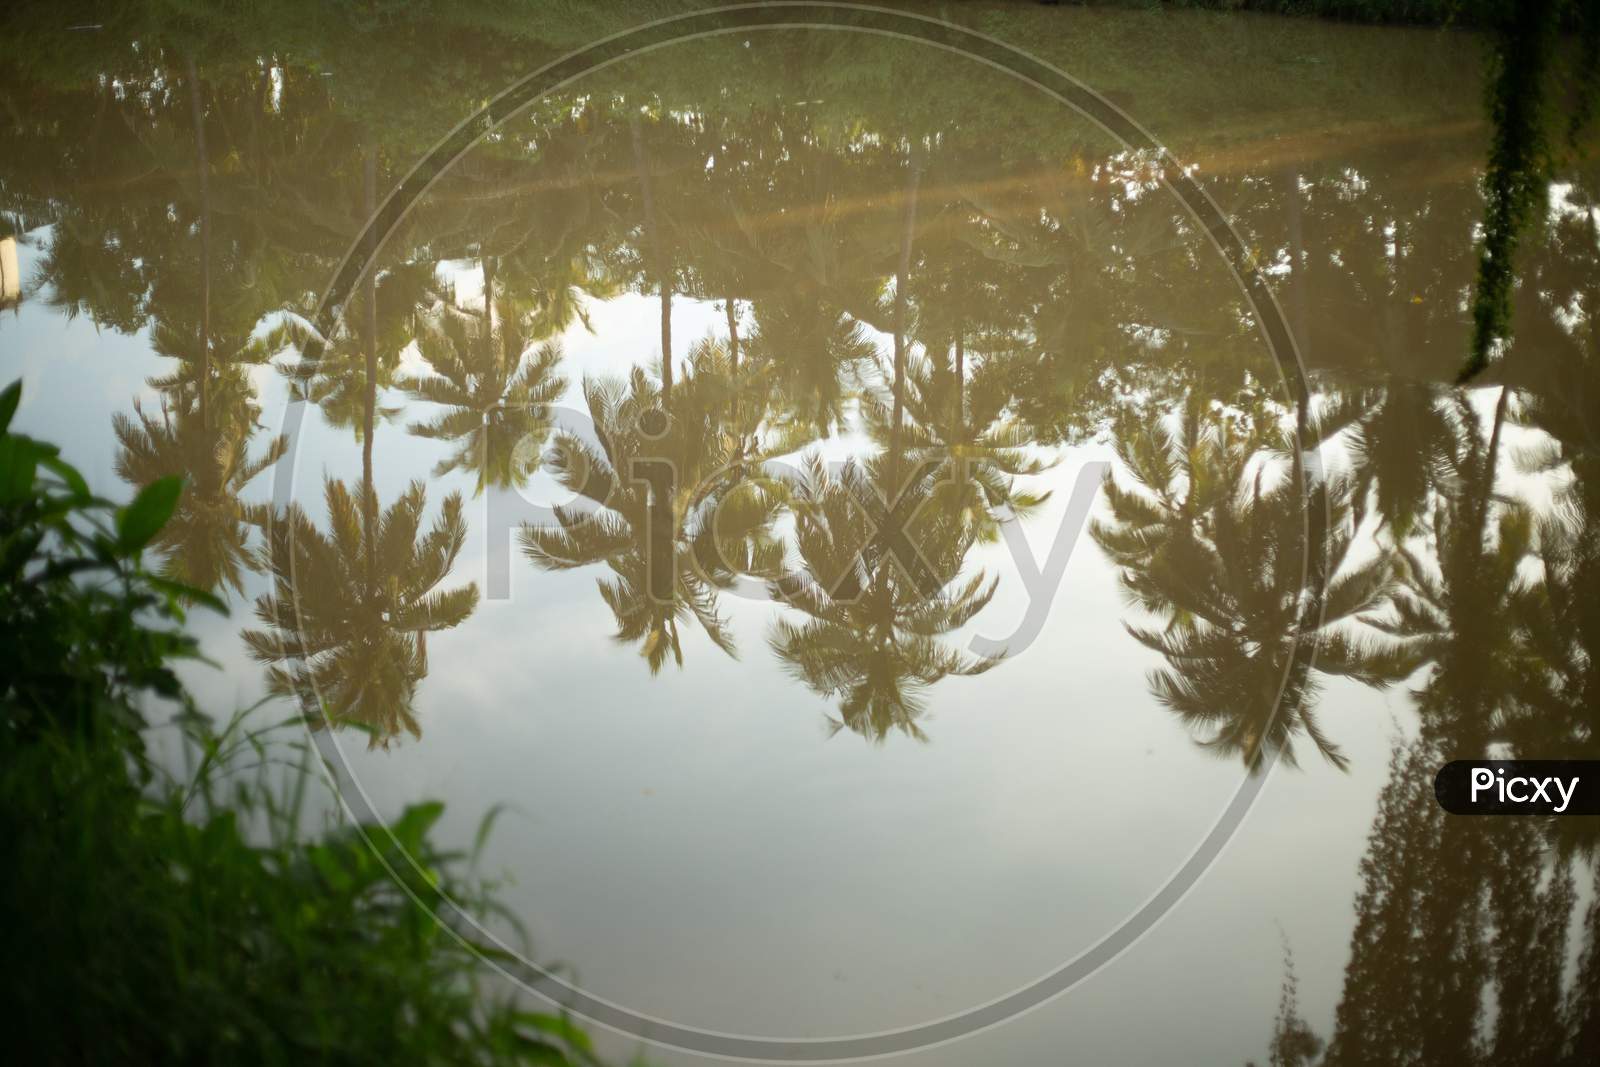 Reflection of coconut trees in the pond water